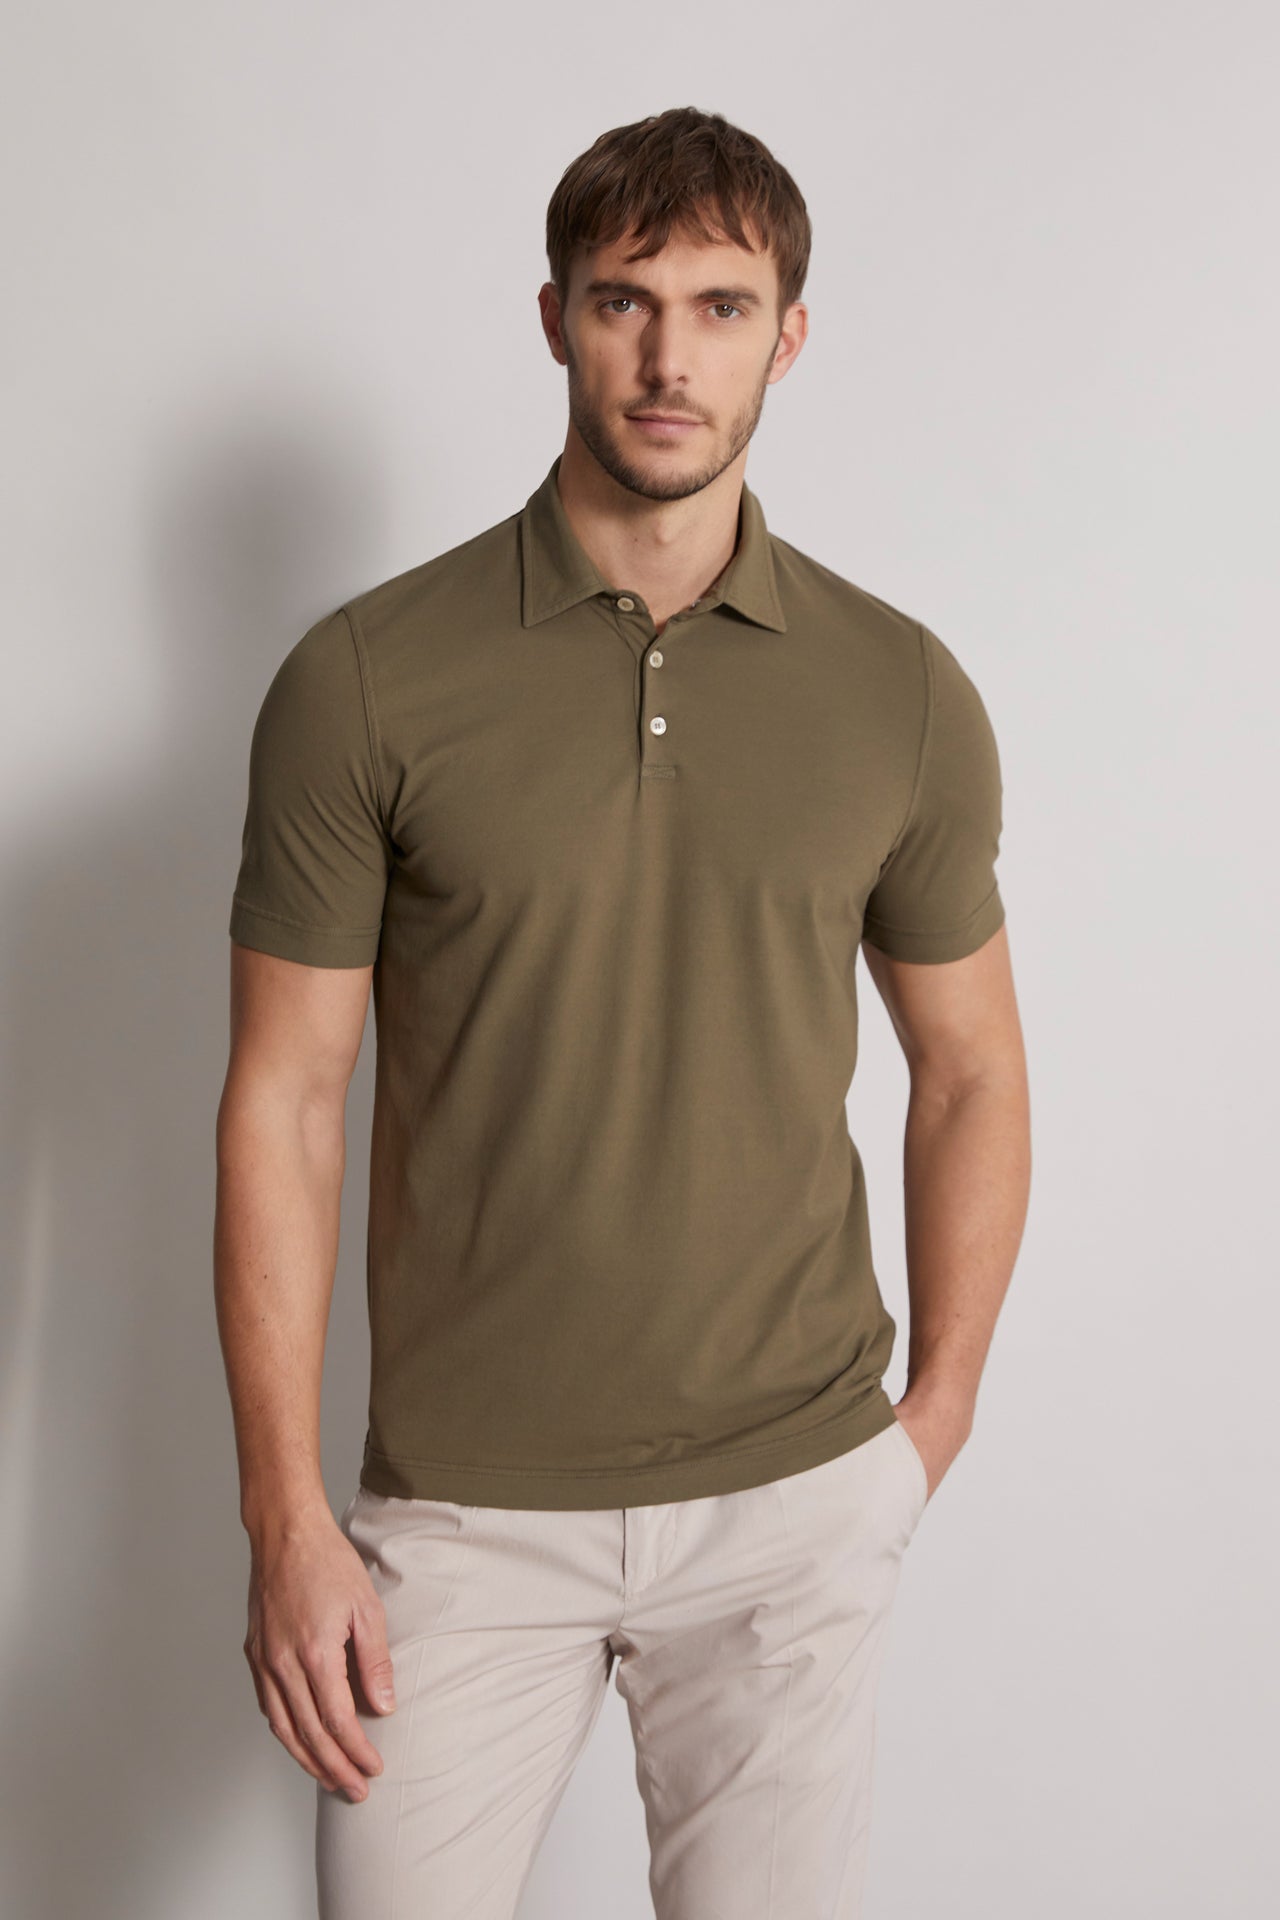 men's iconic cotton polo jersey in olive green